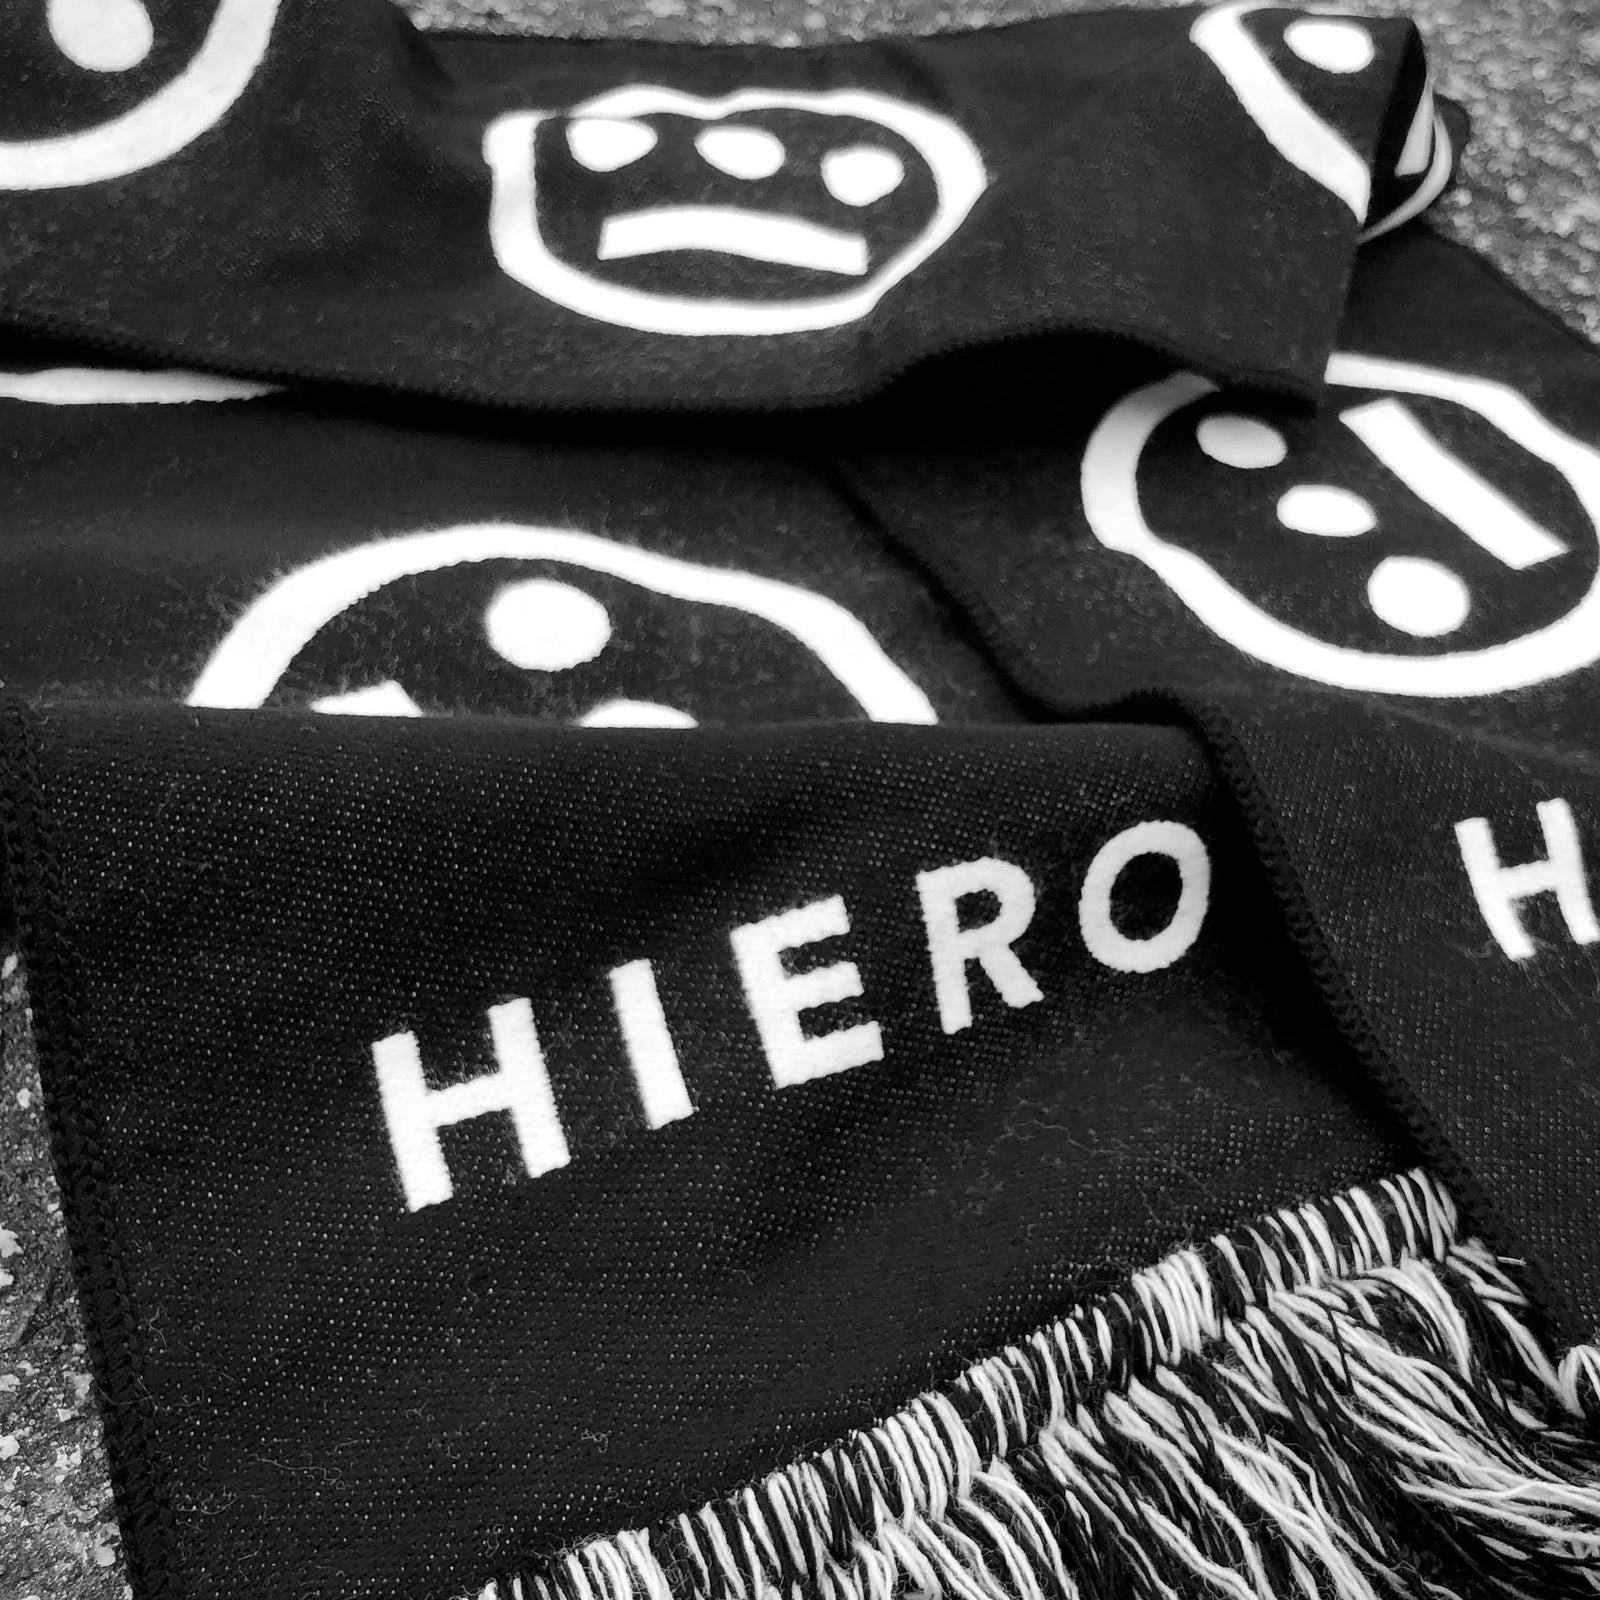 Detailed close-up of HIERO wordmark on a black woven scarf.